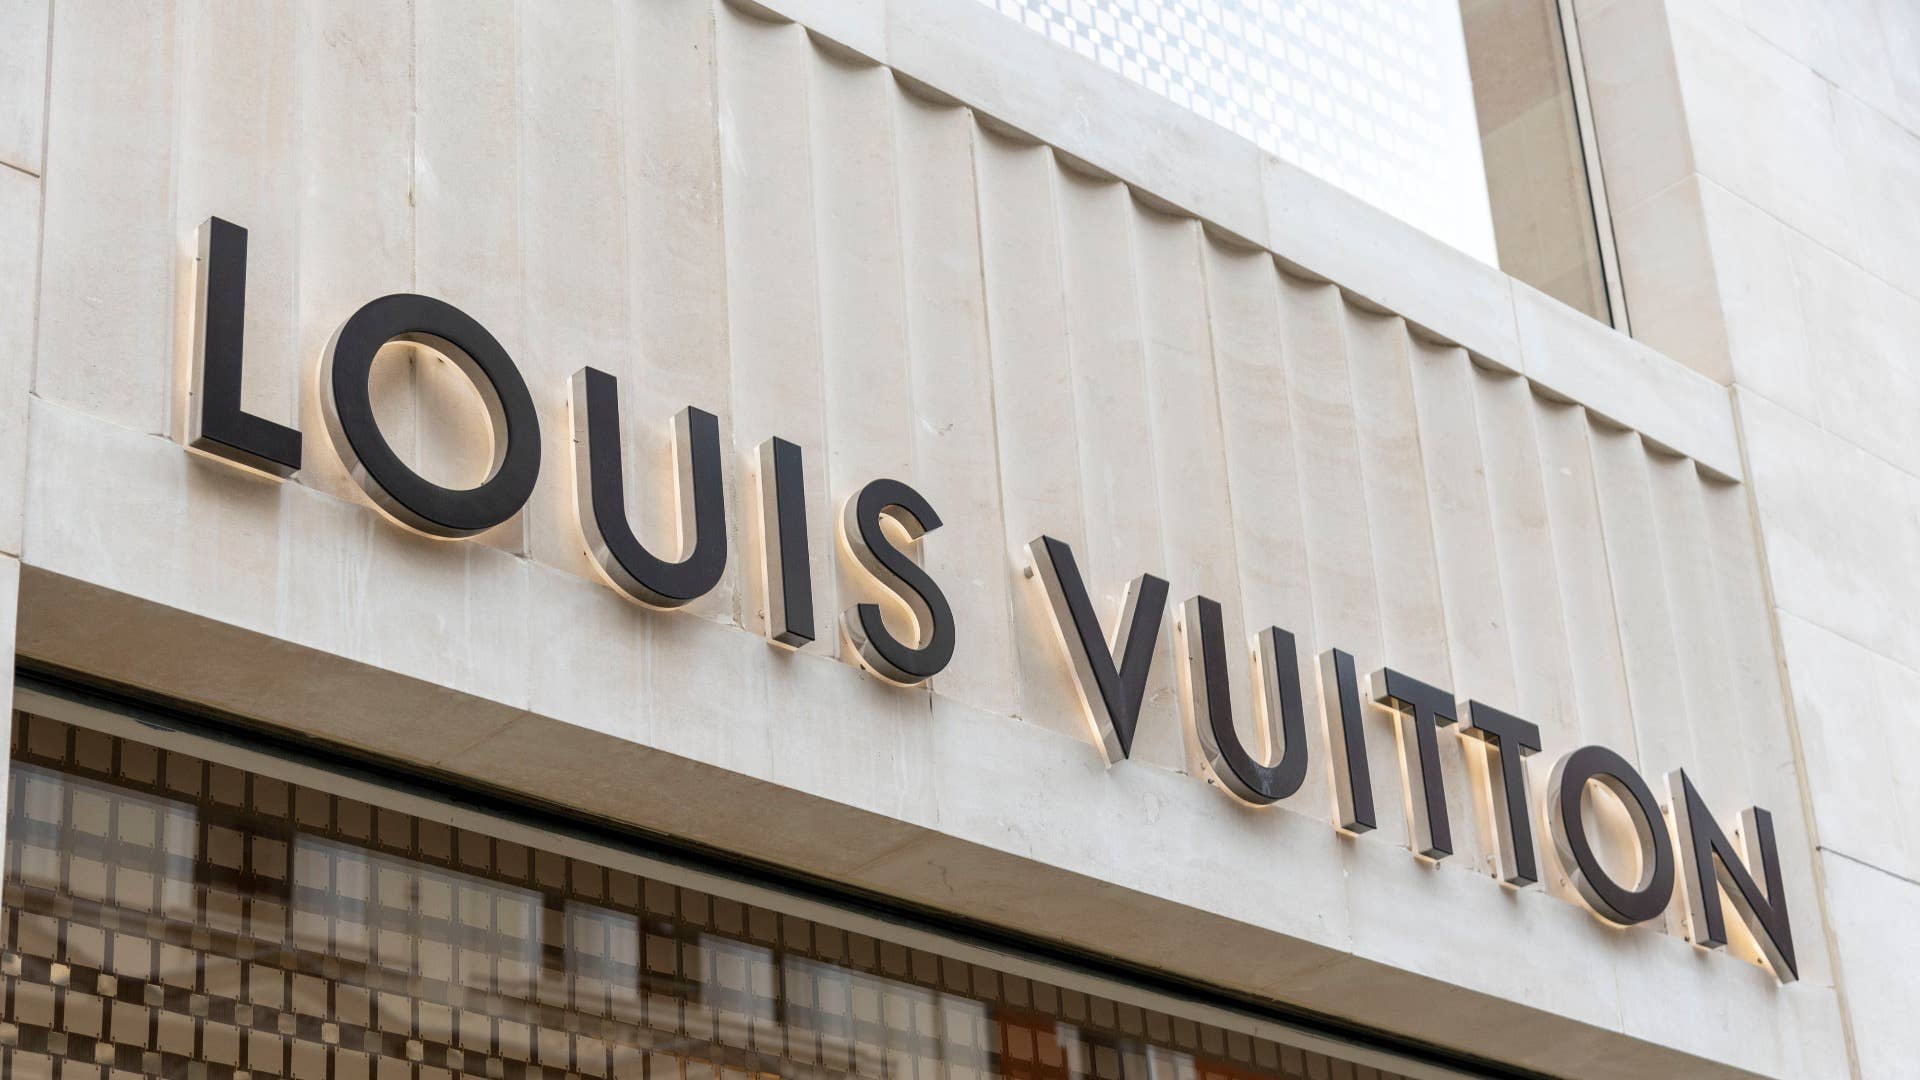 Made in China knock-off:' New Louis Vuitton line ridiculed by fashion lovers